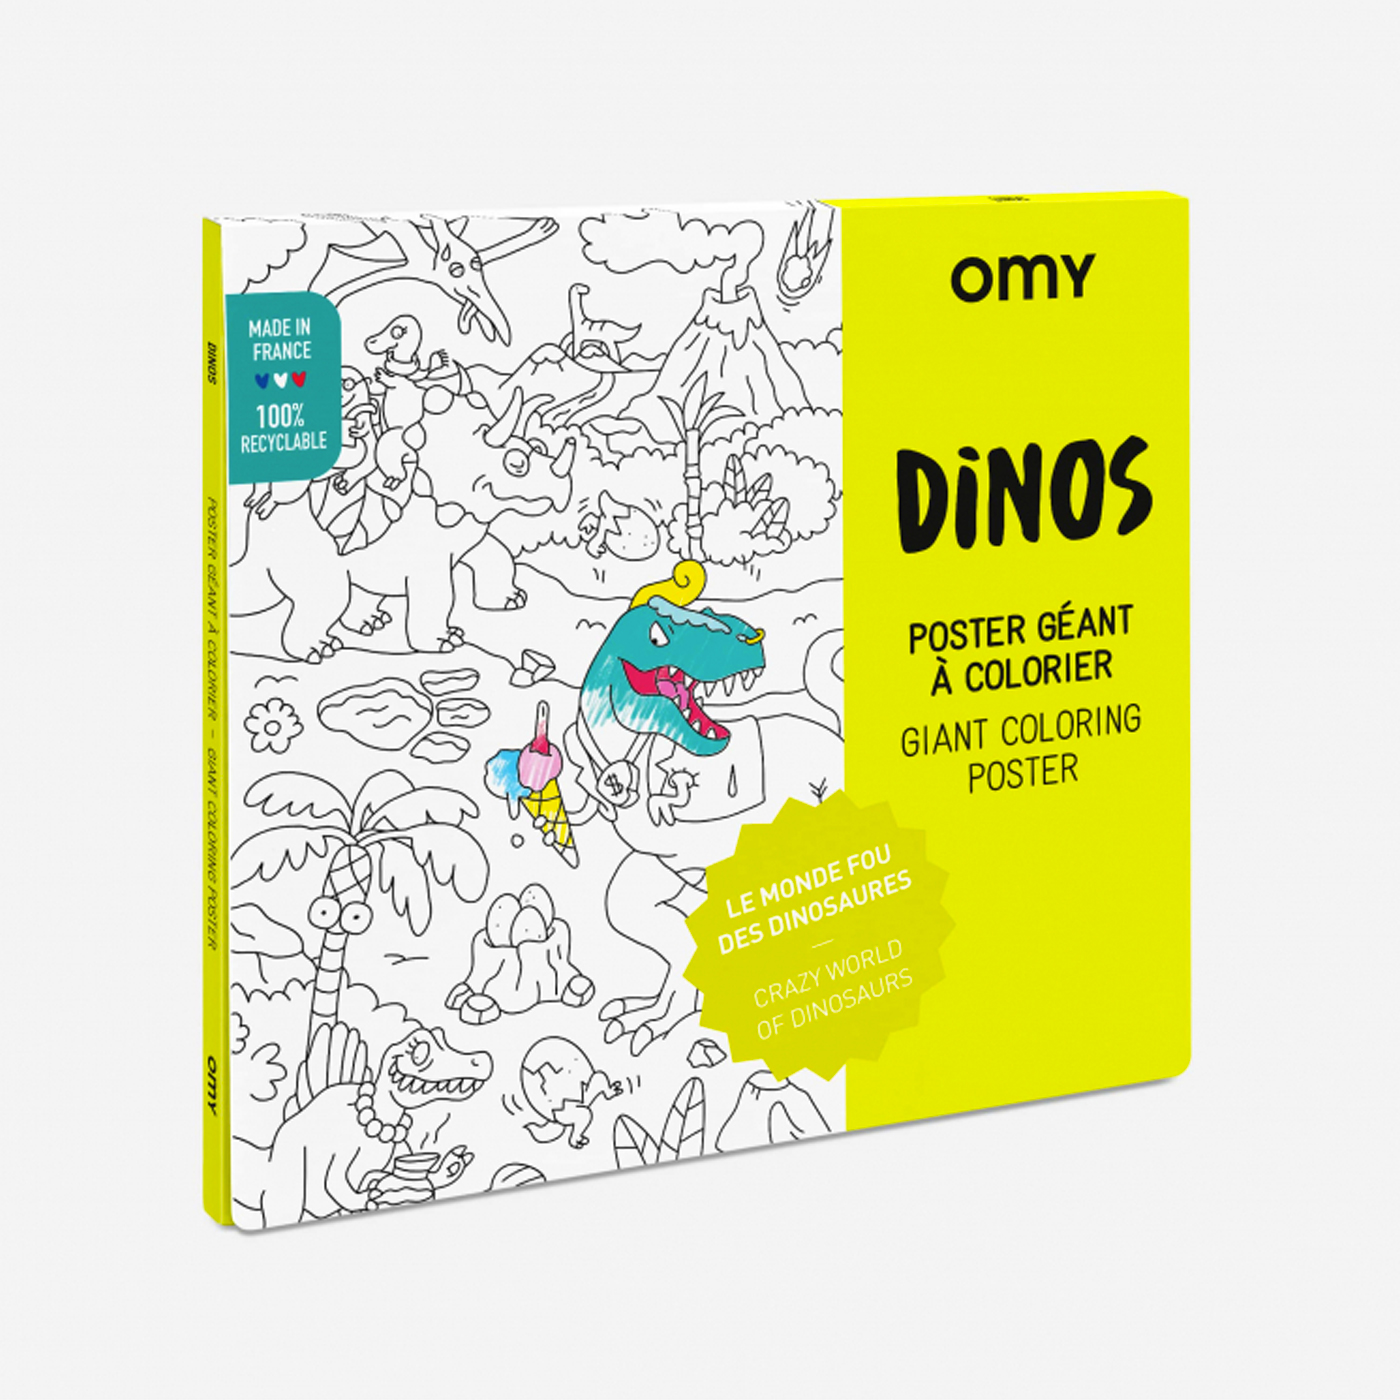  Omy Coloring Poster  | Dinos